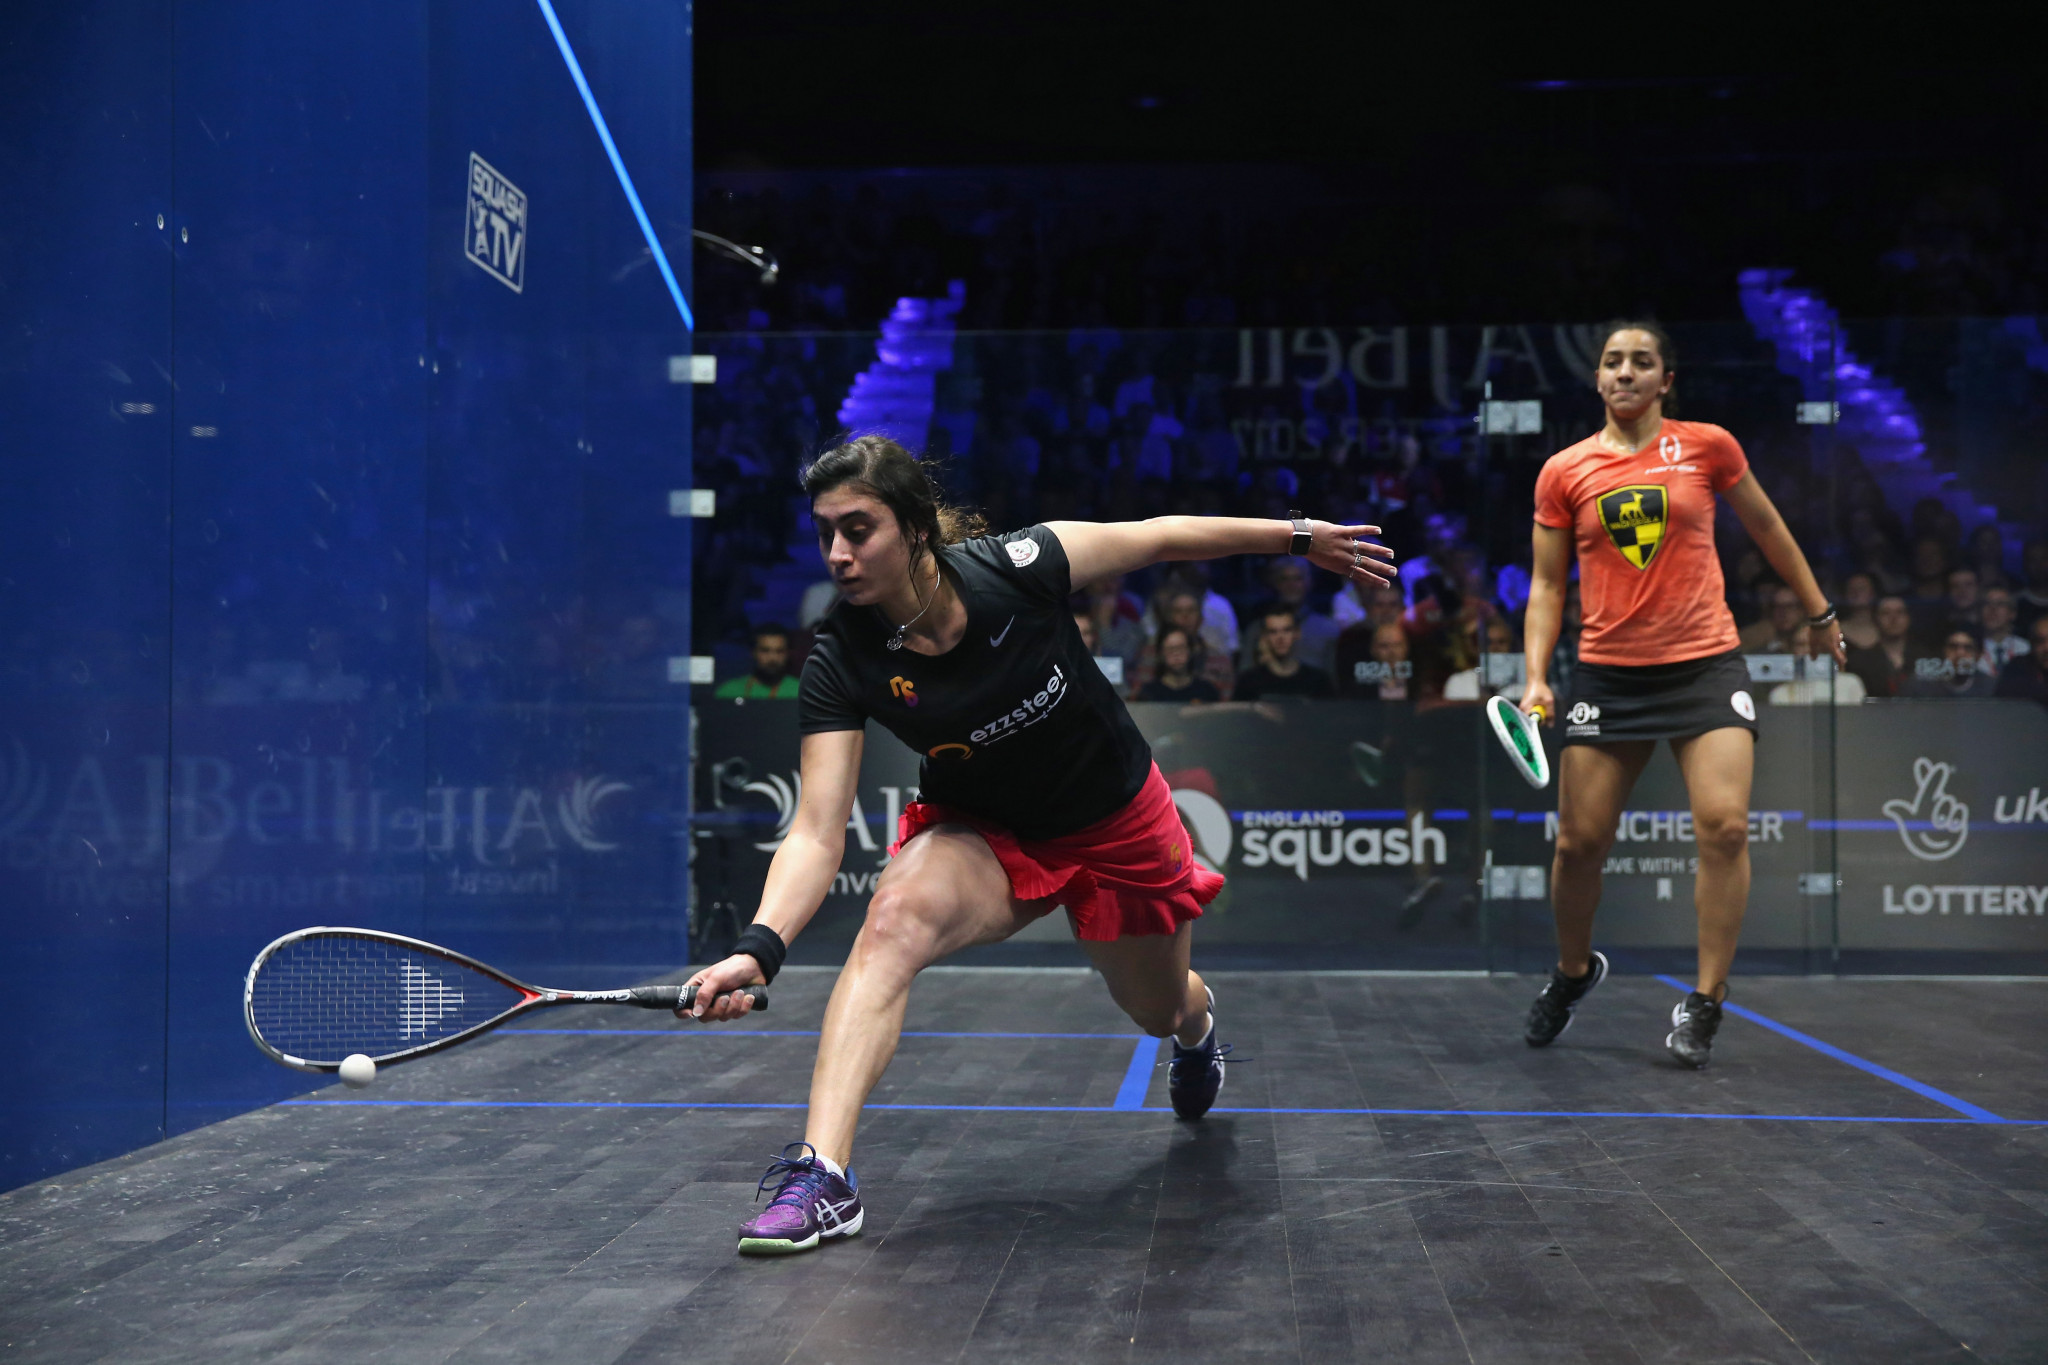 Nour El Sherbini remains the women's world number one ©Getty Images